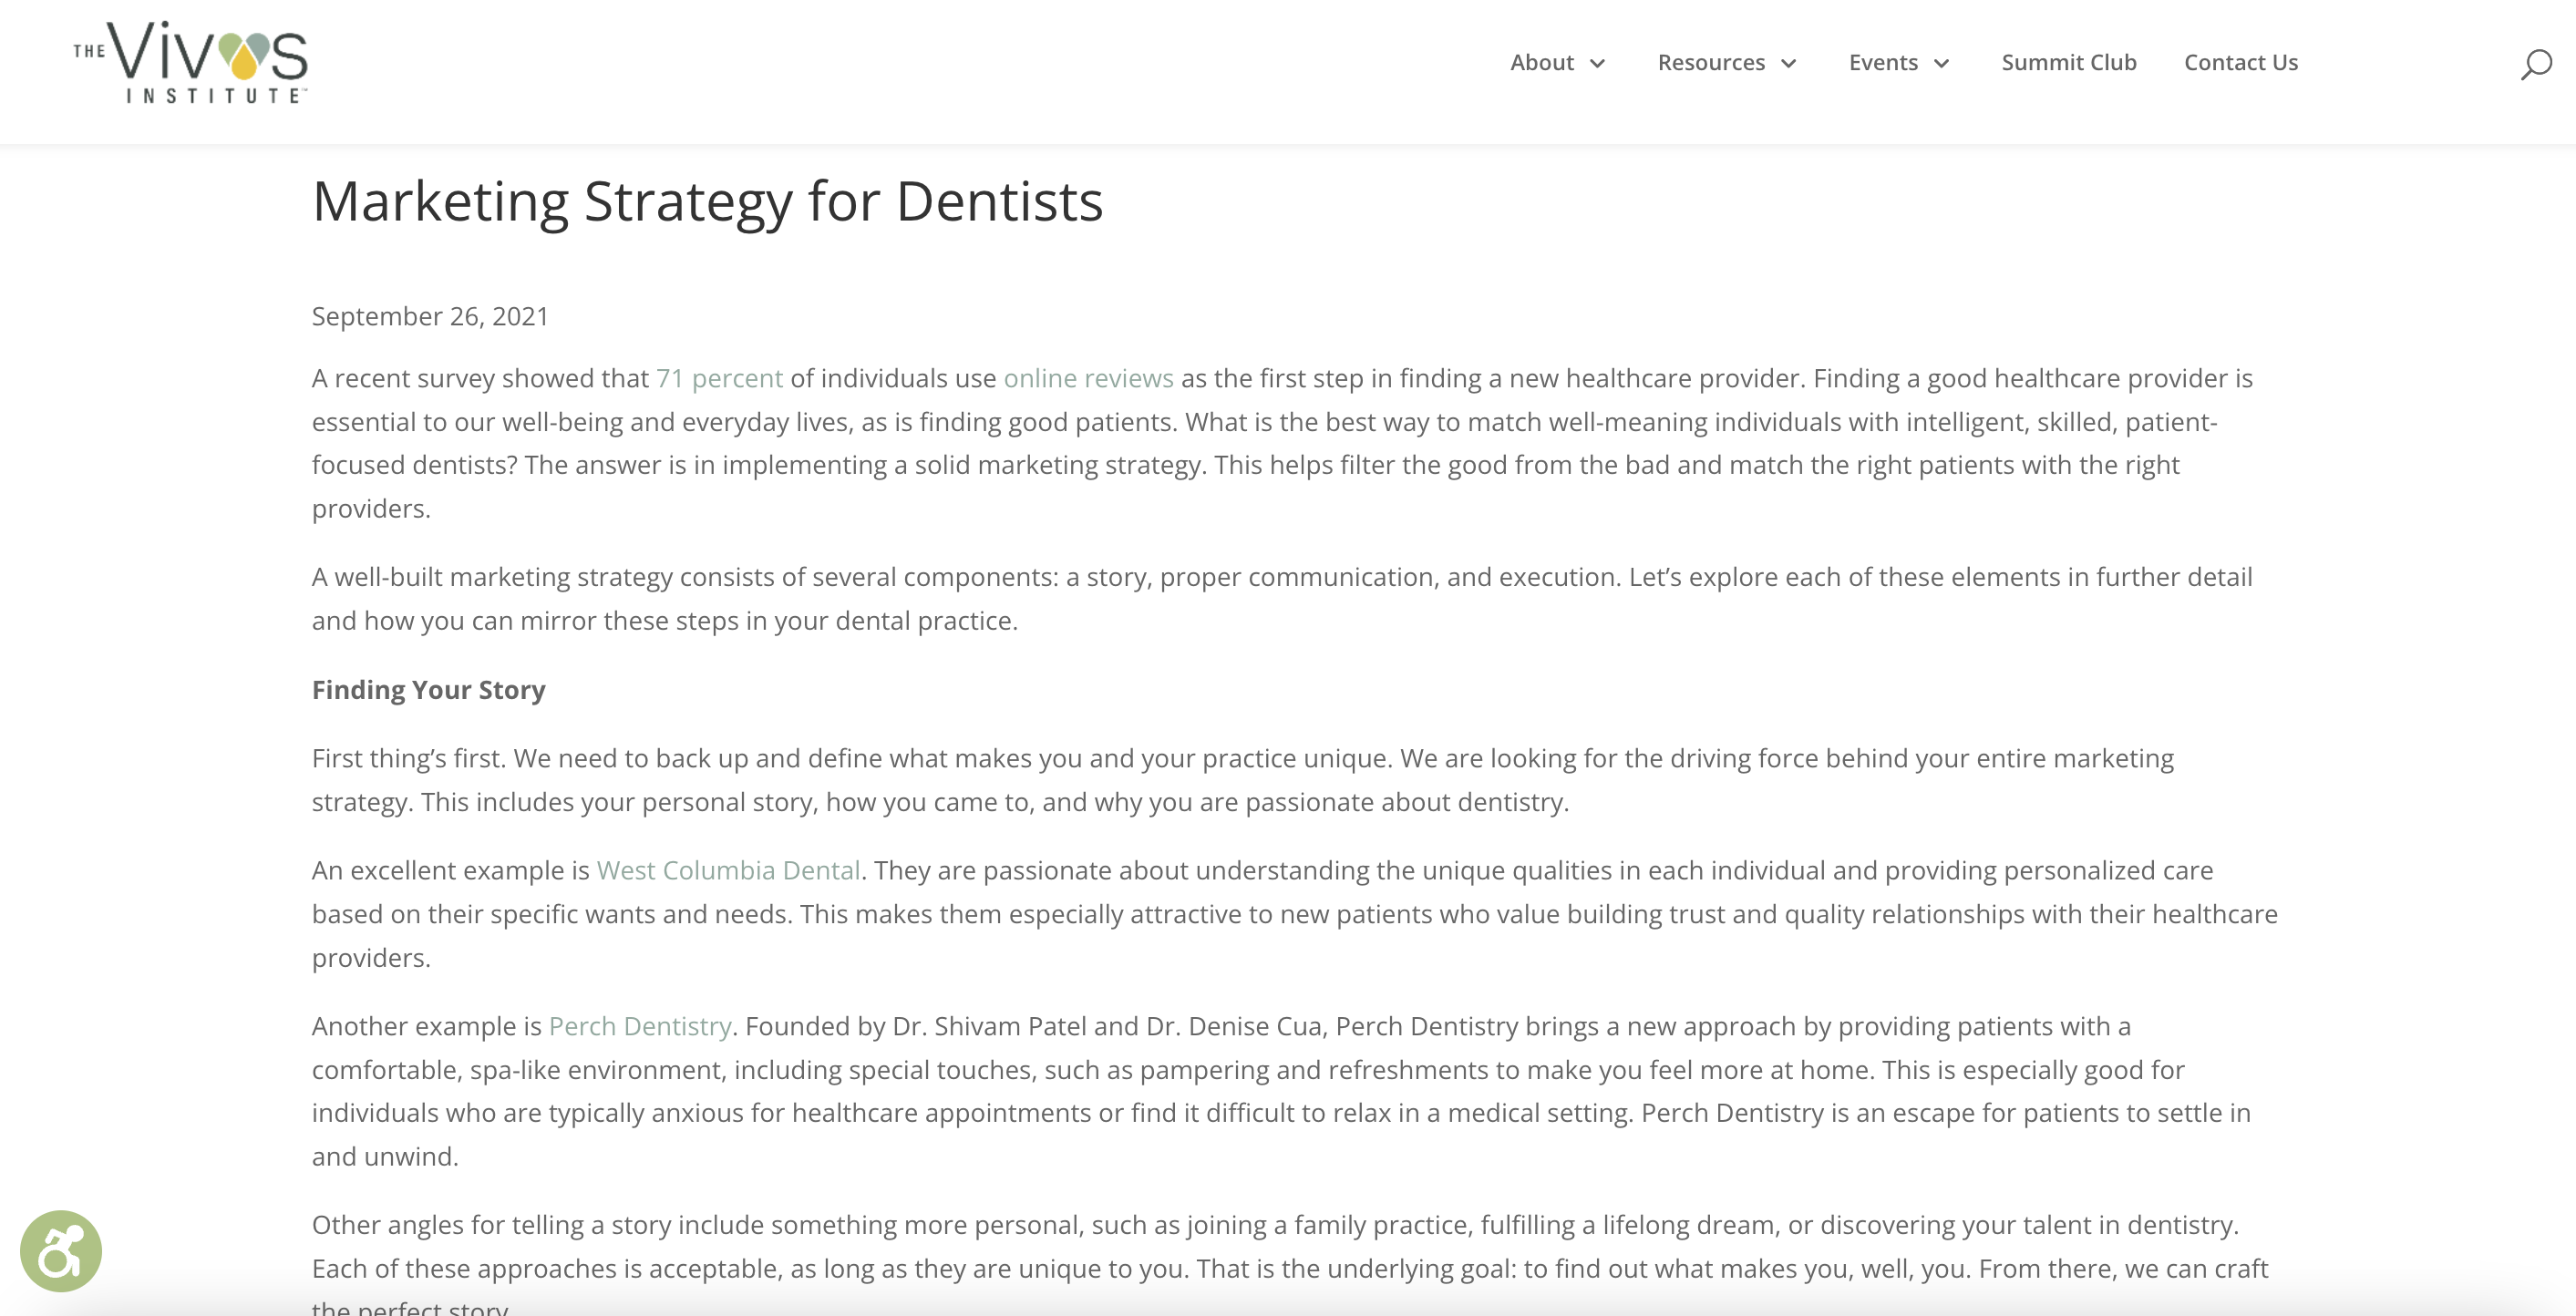 Marketing Strategy for Dentists